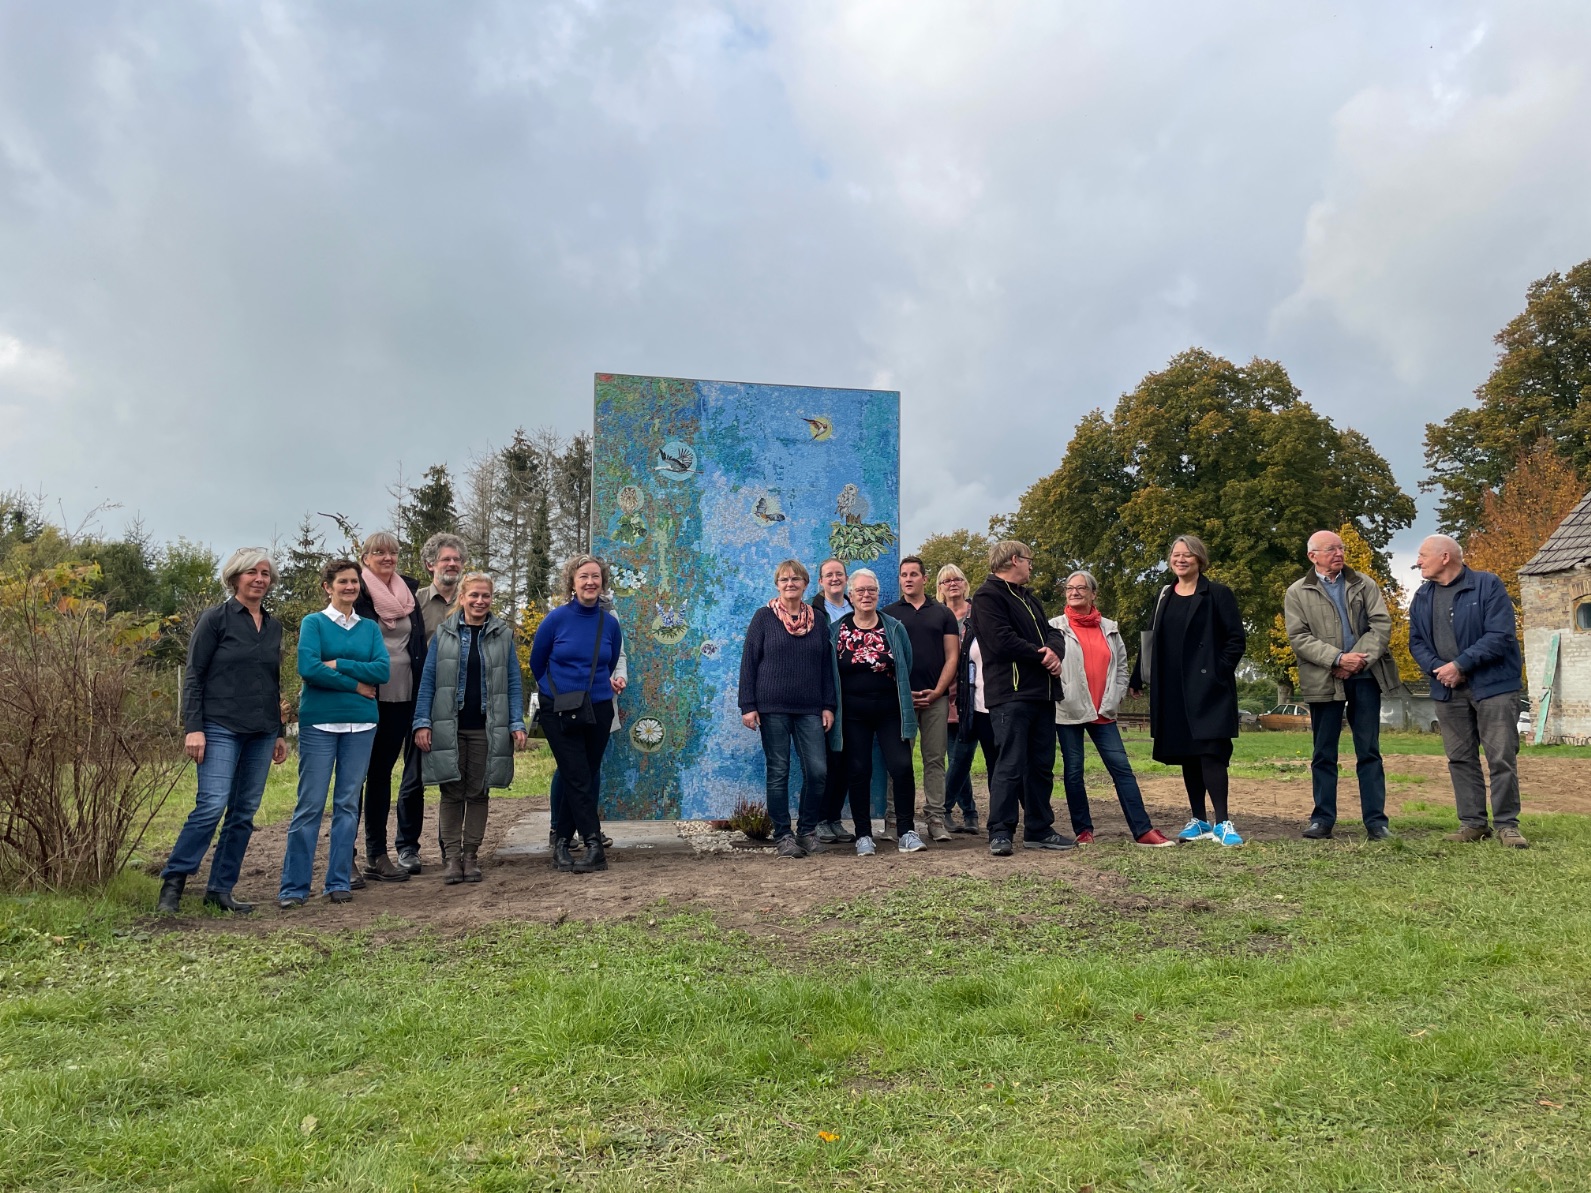 Group photo of The New Patrons' group in front of the mosaic based on the design "Animals and Plants in Wietstock" with artist Antje Majewski and mediator Susanne Burmester 